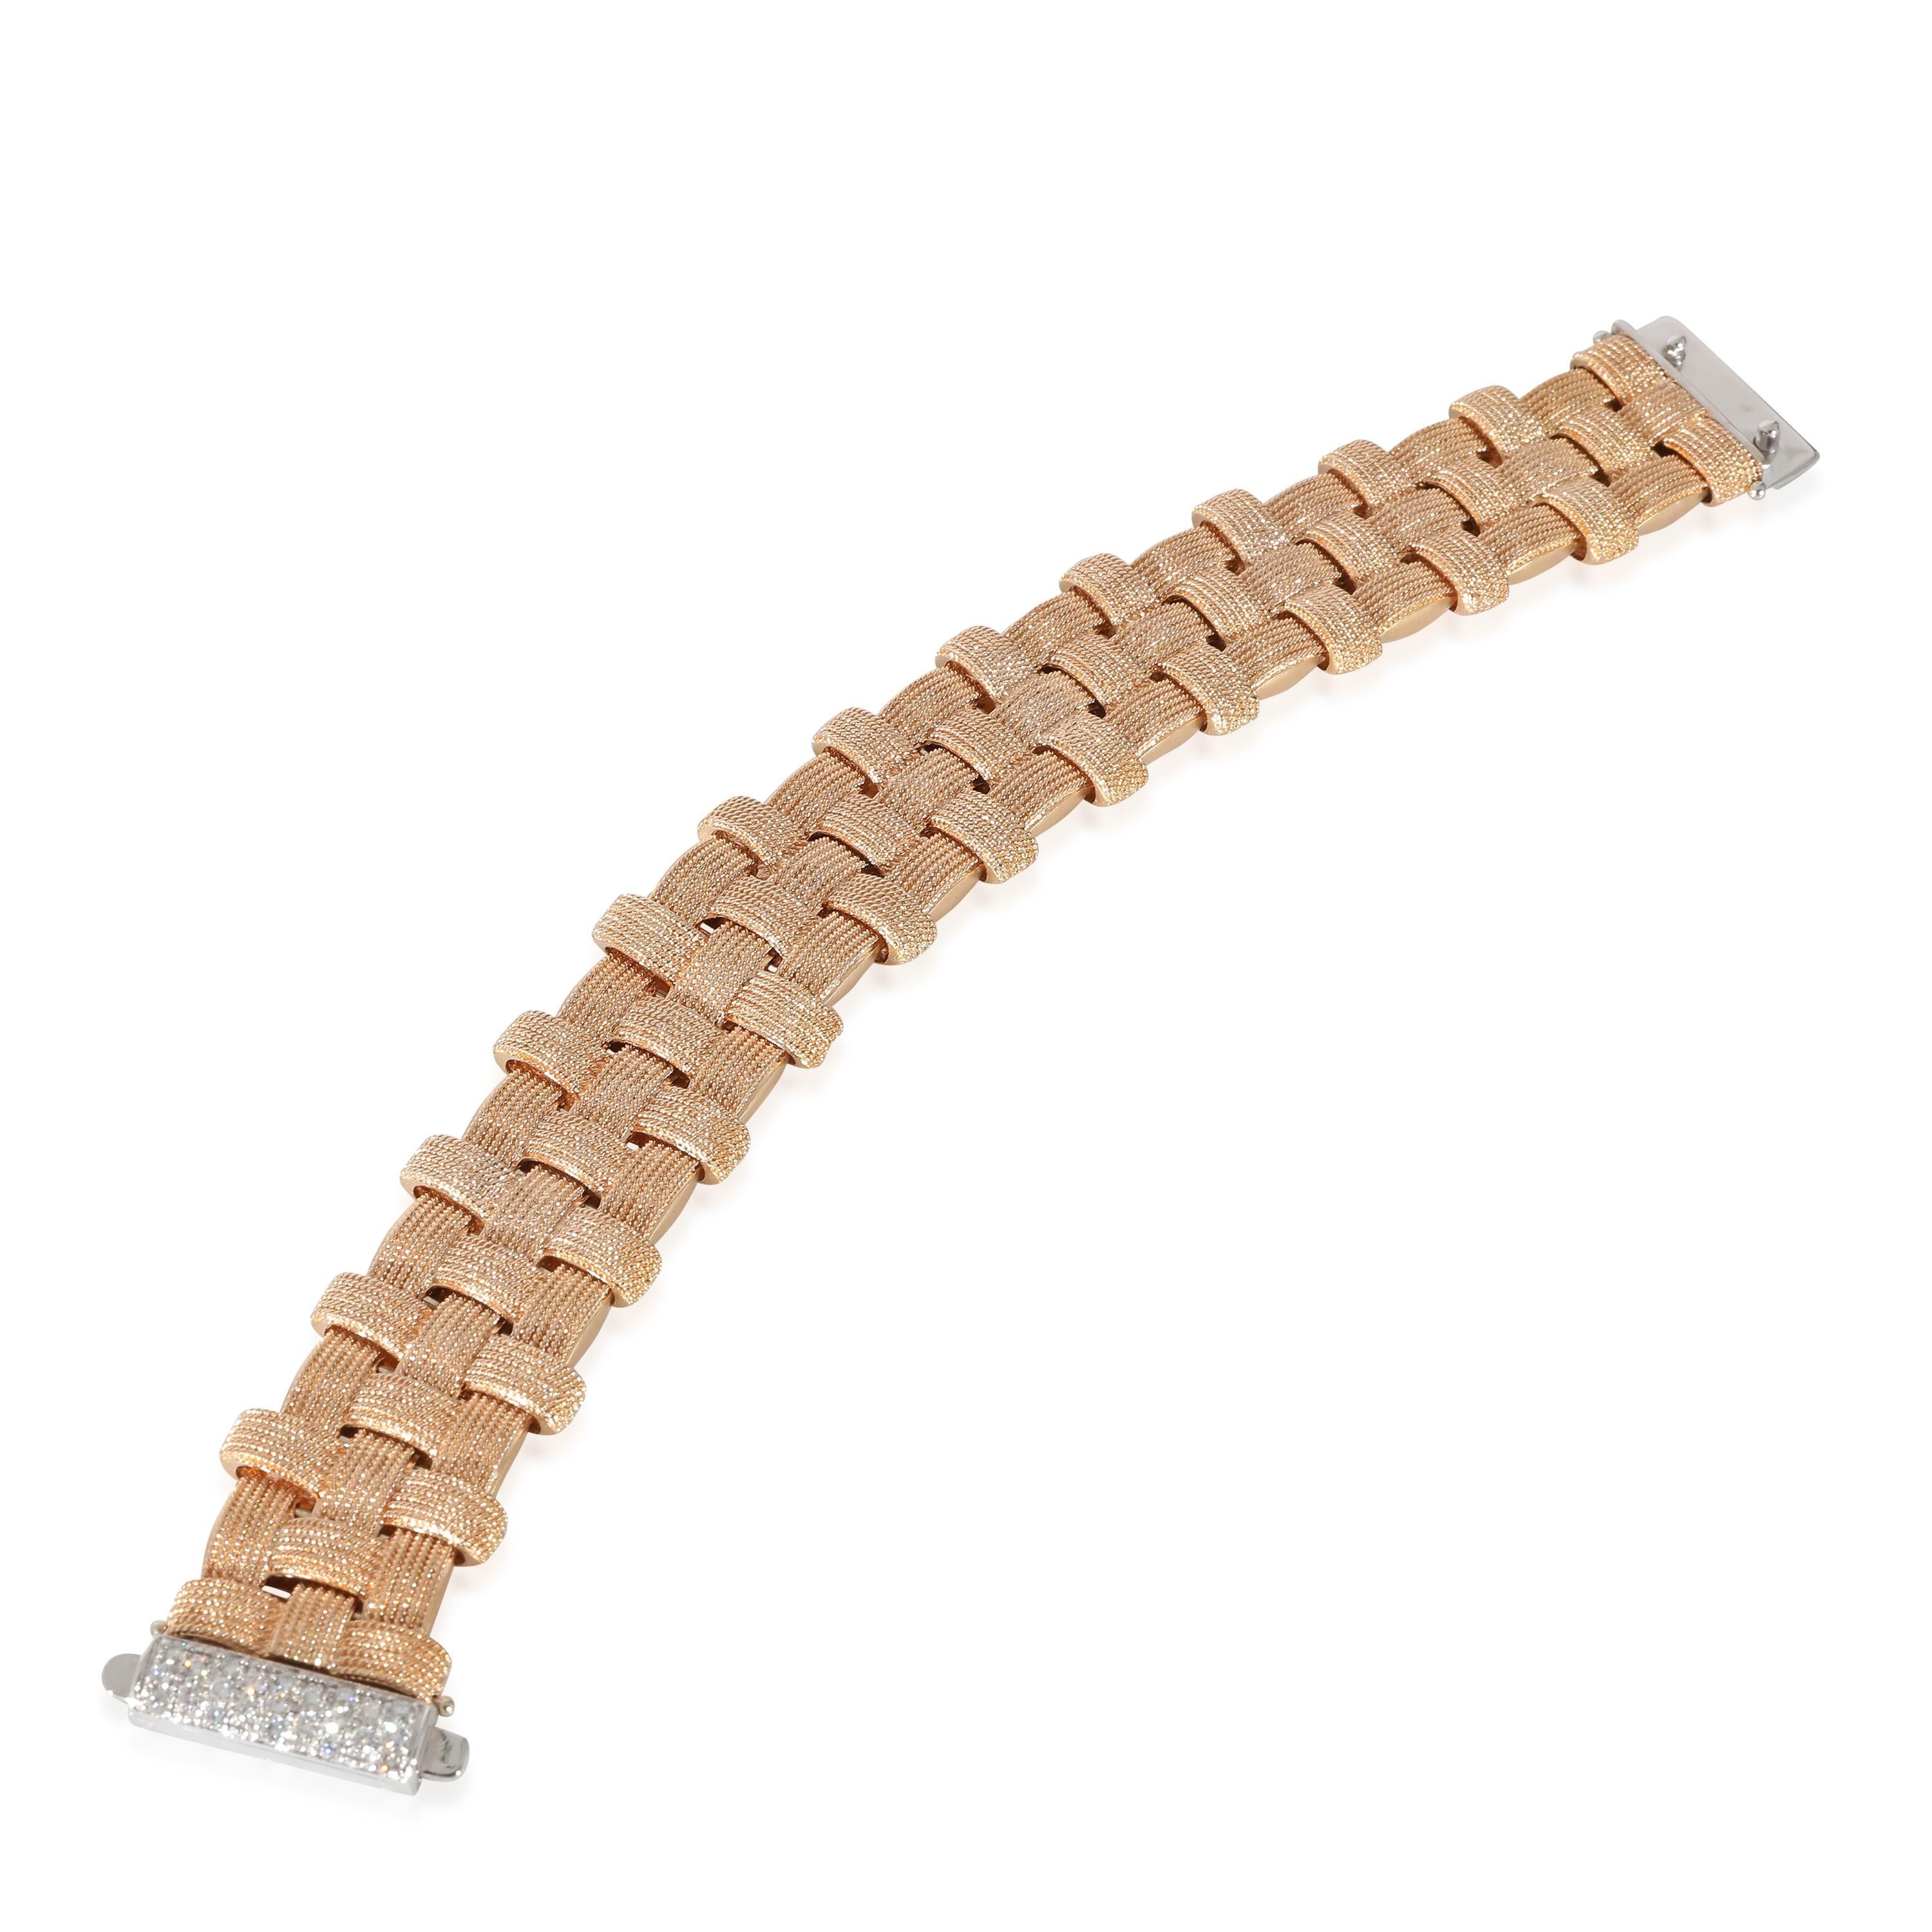 Roberto Coin Appassionata Diamond Bracelet in 18k Rose Gold 0.28 CTW

PRIMARY DETAILS
SKU: 132702
Listing Title: Roberto Coin Appassionata Diamond Bracelet in 18k Rose Gold 0.28 CTW
Condition Description: Retails for 16000 USD. In excellent